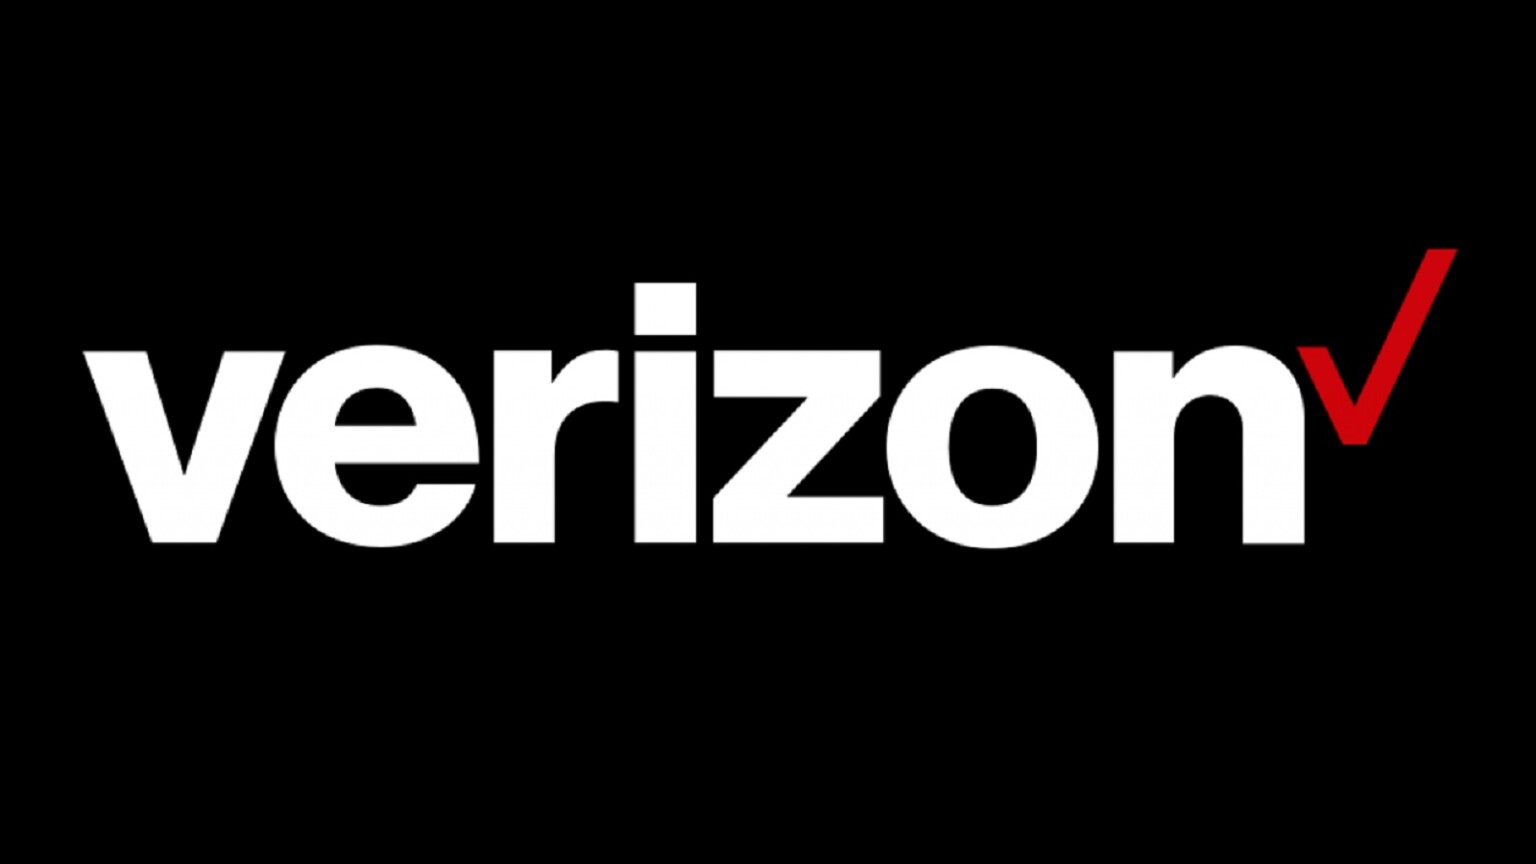 Verizon Adds Hulu and ESPN+ to Disney+ for Free for Top Tier Subscribers